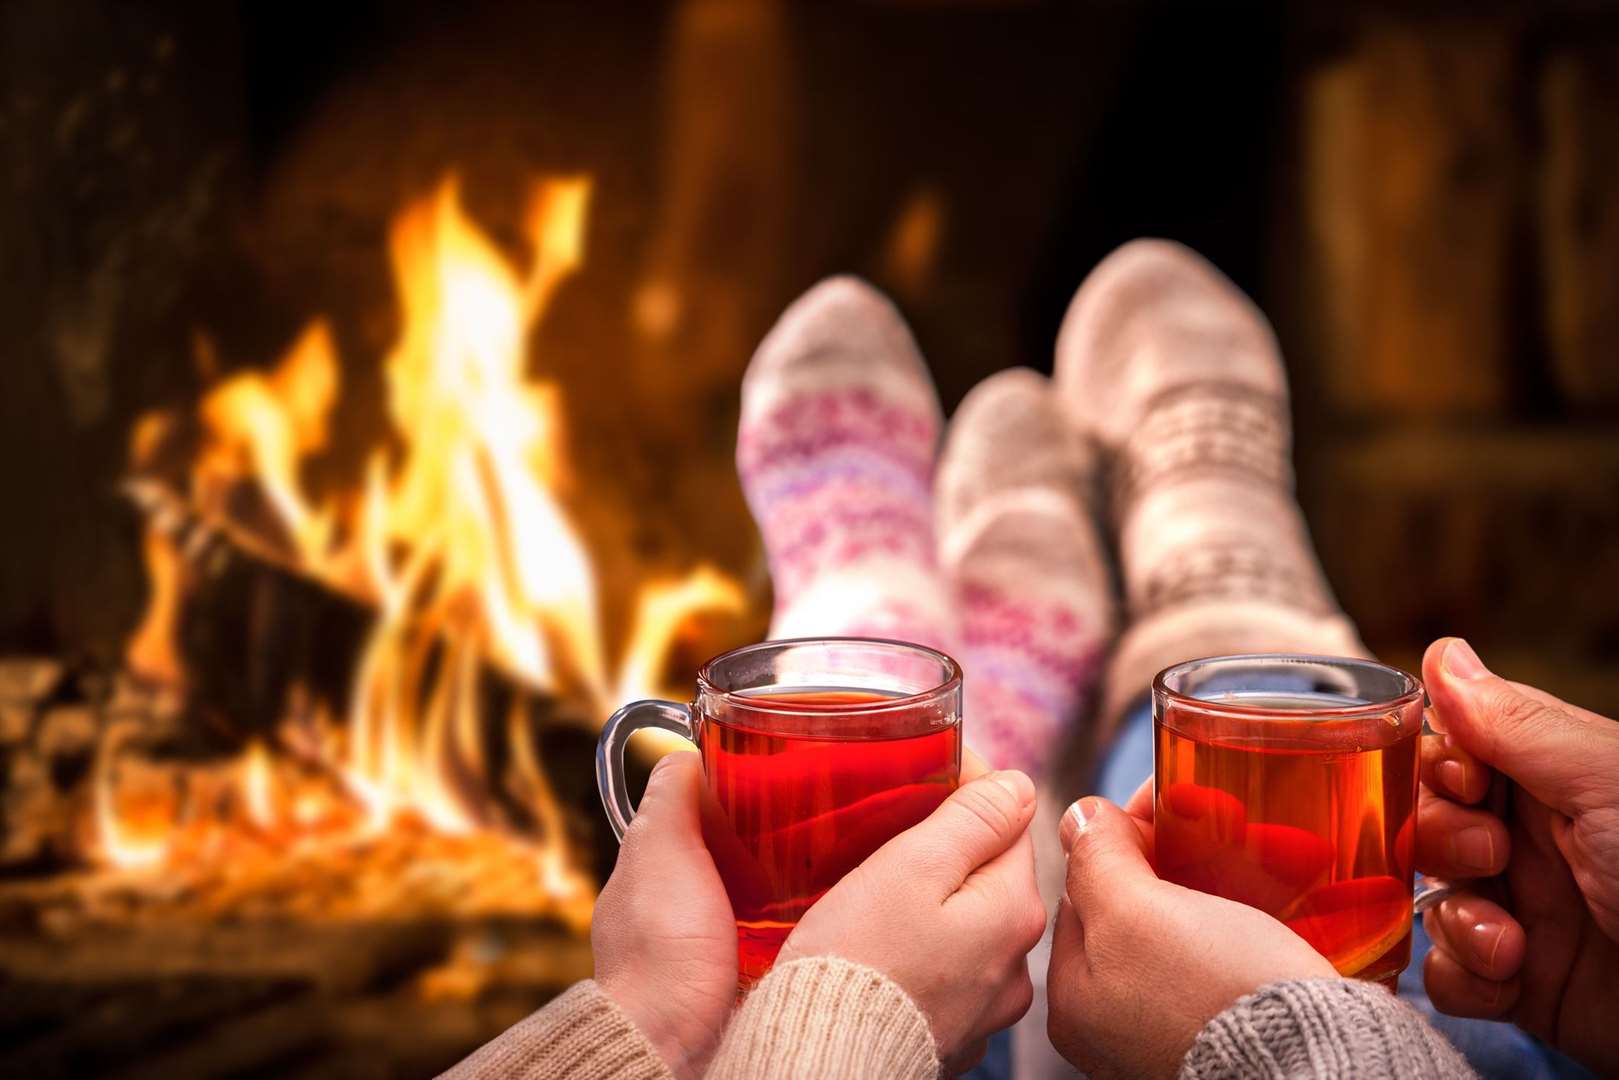 Snuggle up with a mulled wine and embrace the Danish spirit of hygge this winter